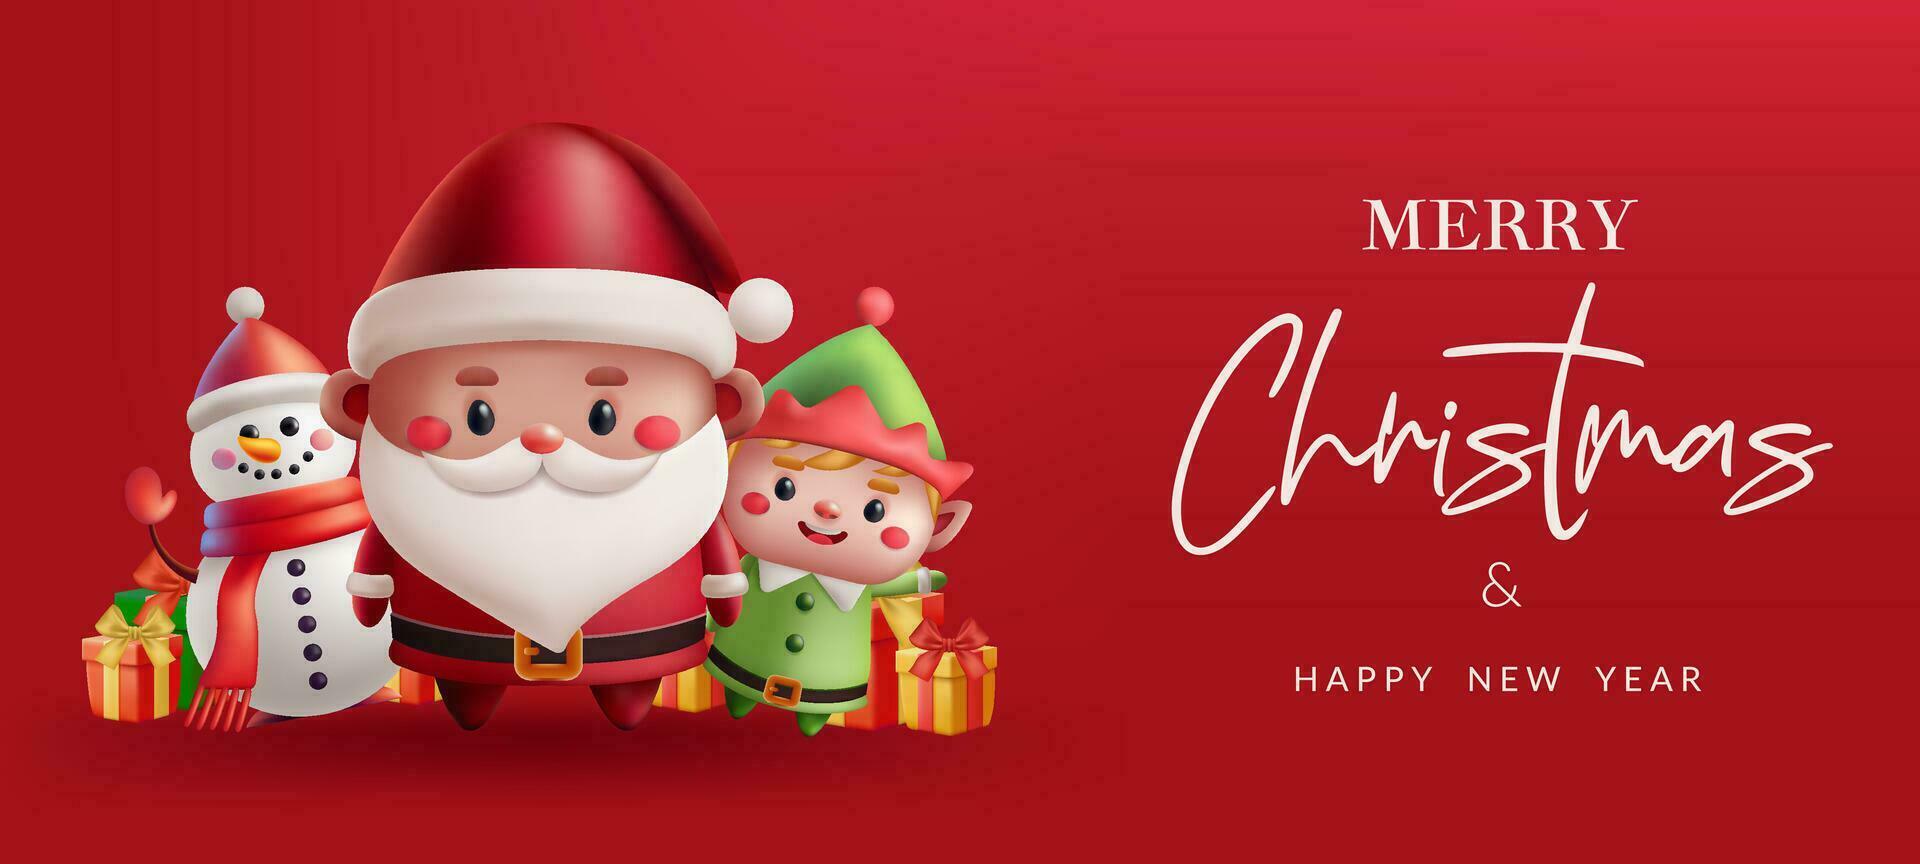 Red banner with cute cartoon characters Santa, elf, snowman with presents in a joyful 3D Christmas illustration. Perfect for holiday greetings and festive designs. Not AI generated. vector